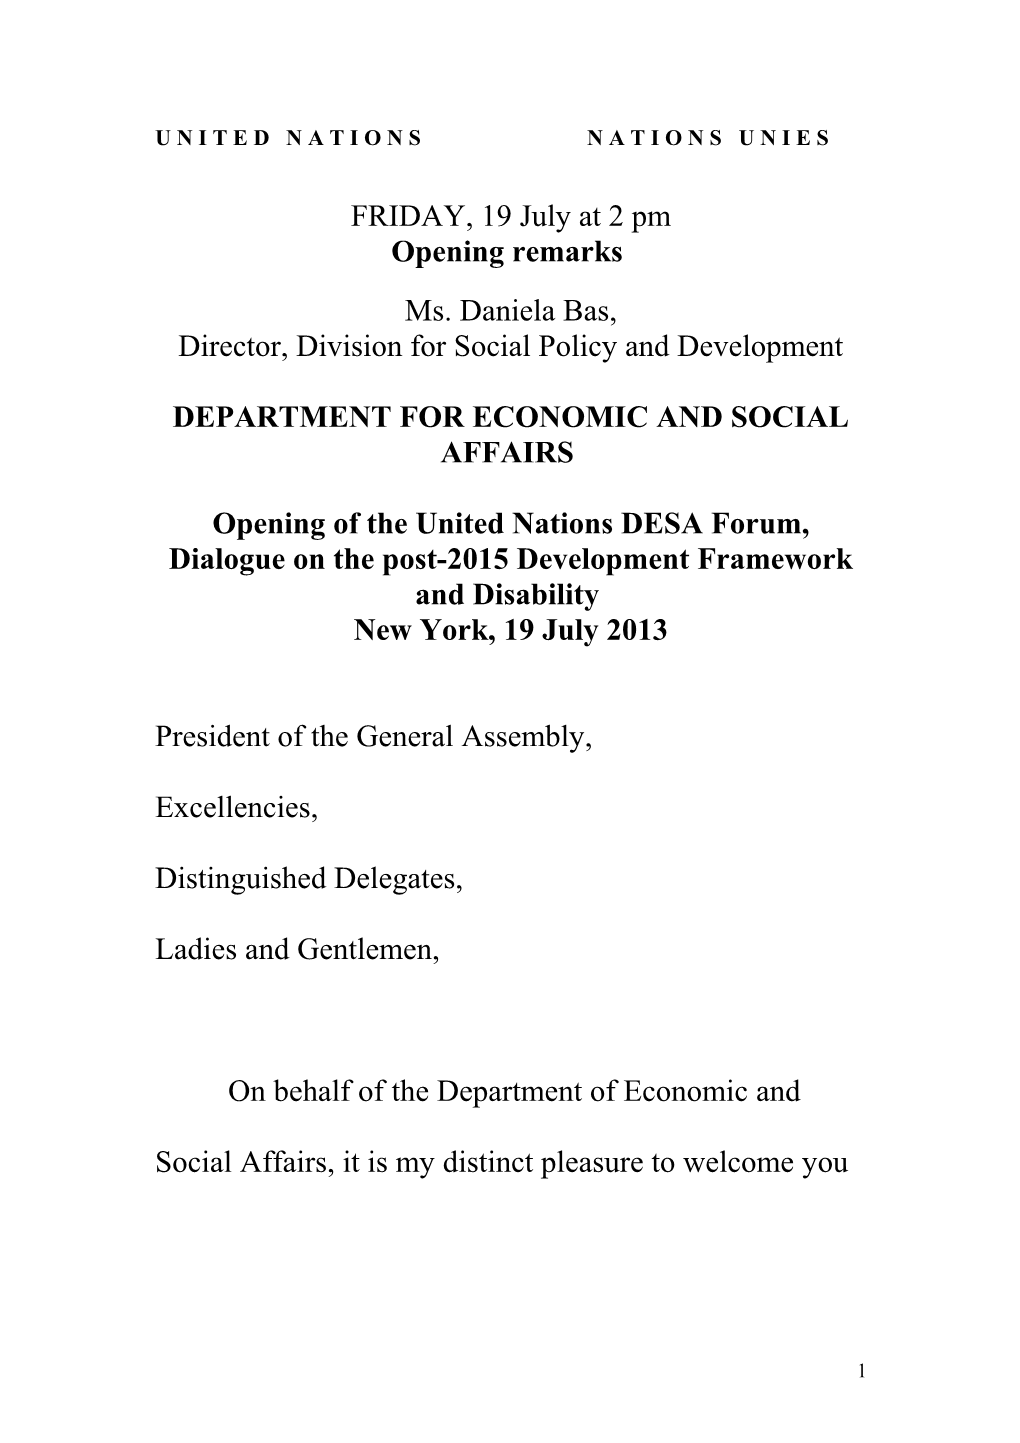 Director, Division for Social Policy and Development